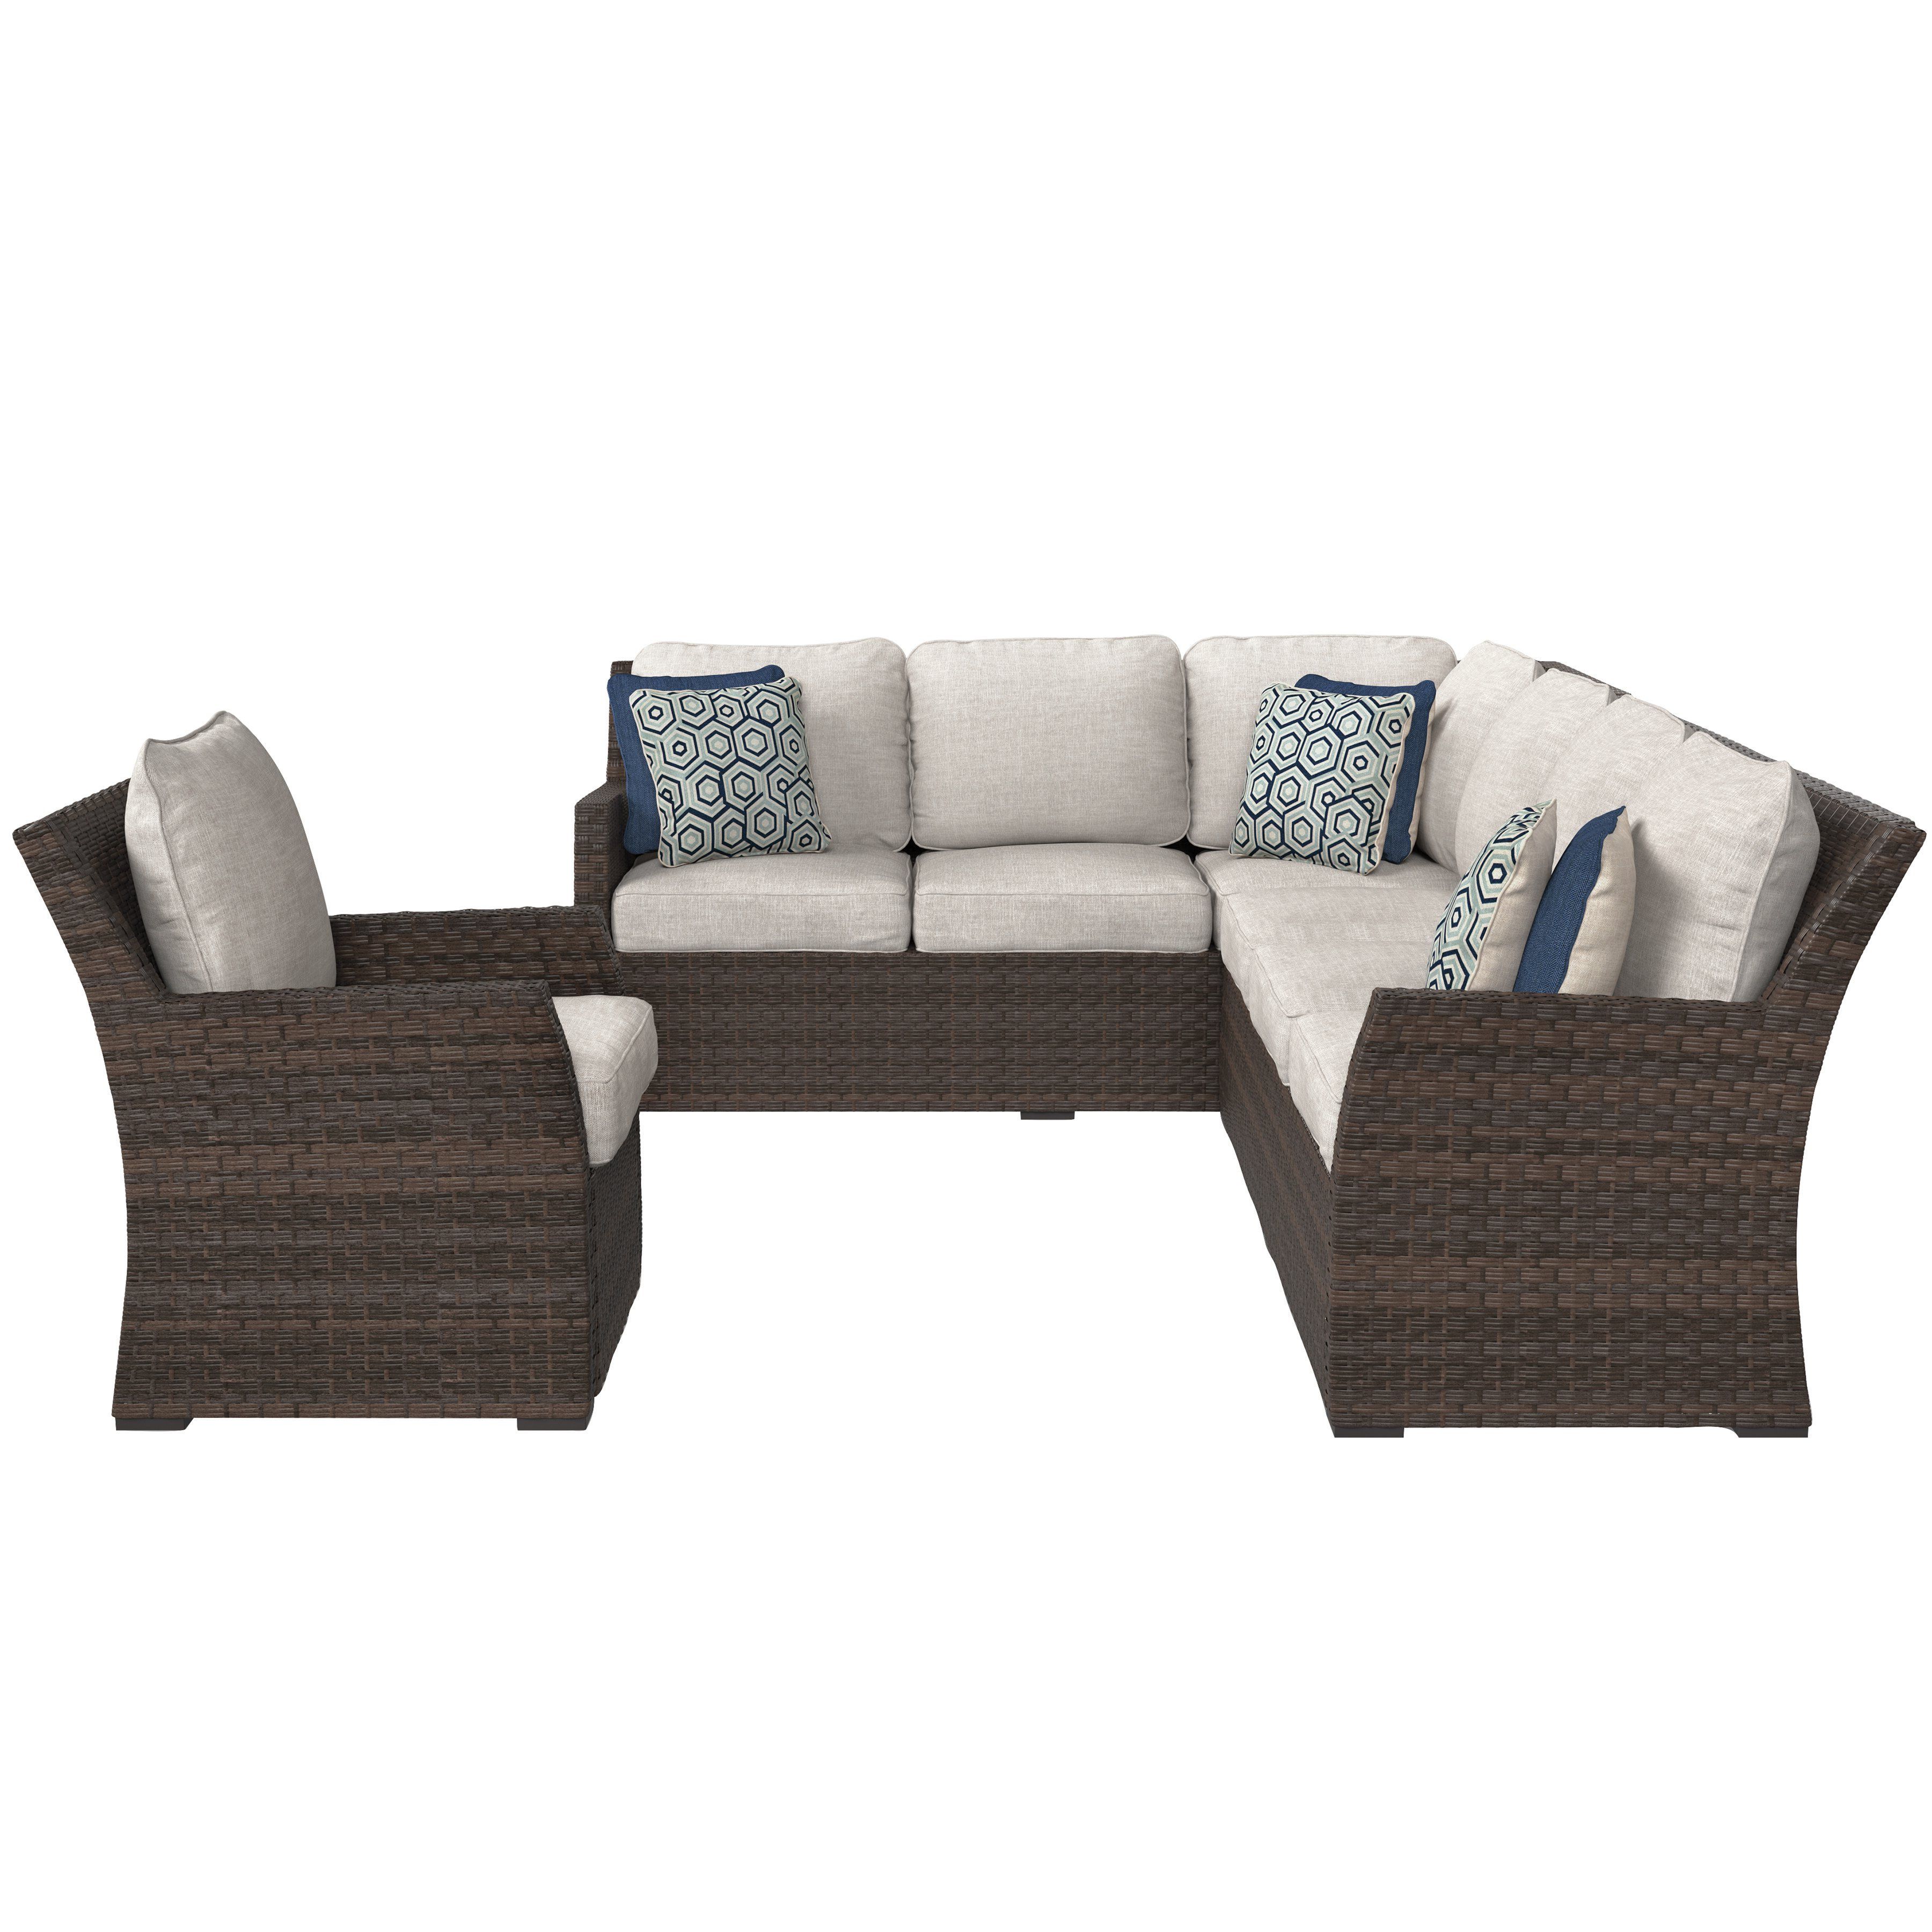 Hursey Patio Sectionals Within Widely Used Adele Patio Sectional With Cushions (View 11 of 20)